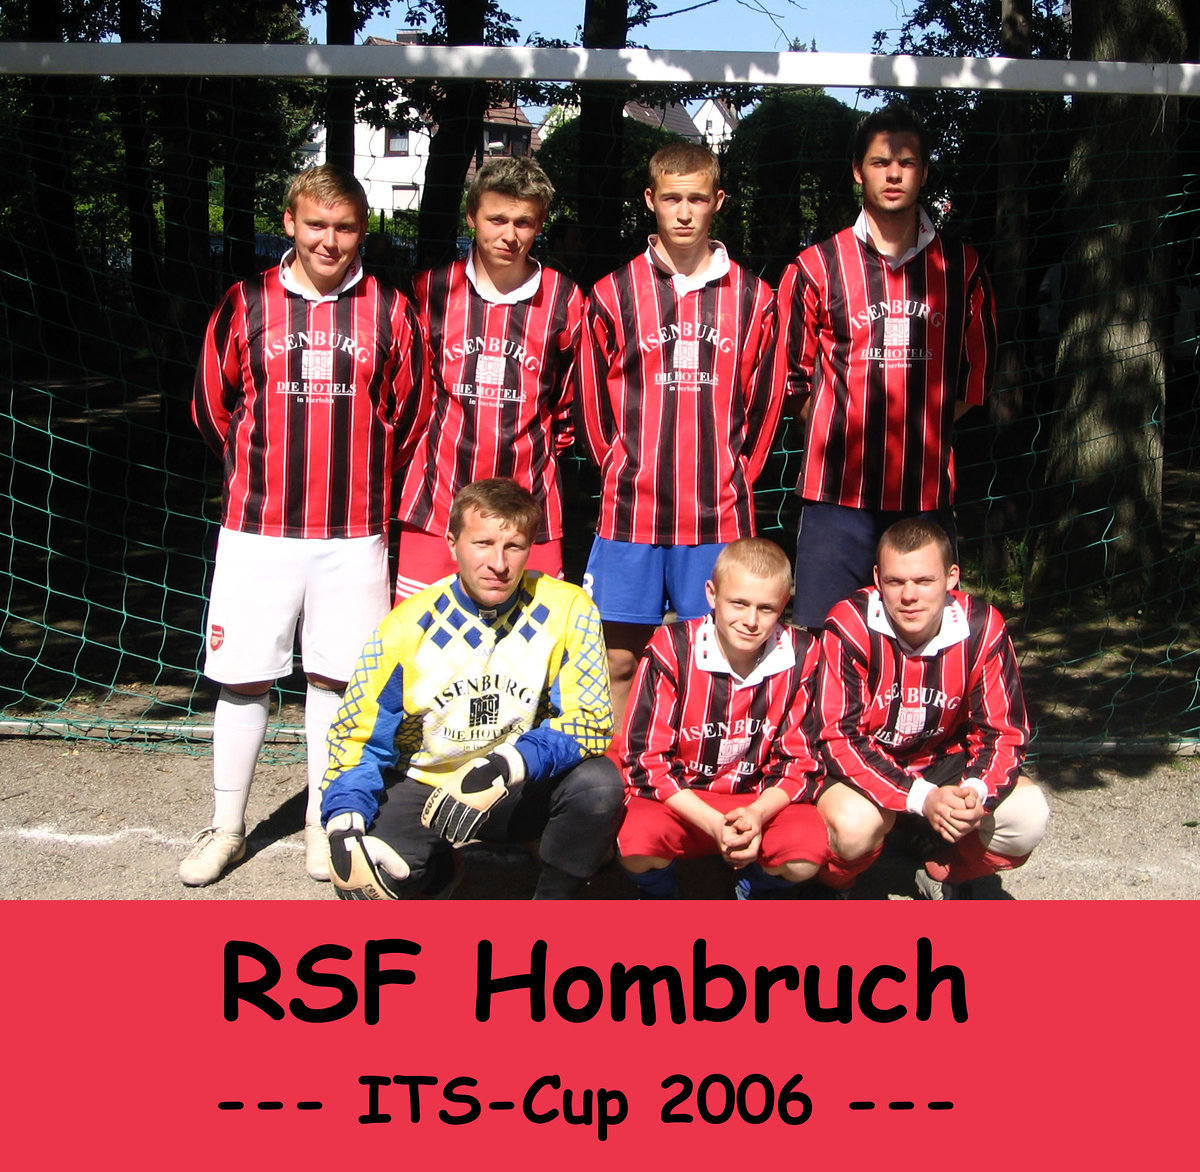 Its cup 2006   teamfotos   rsf hombruch retina